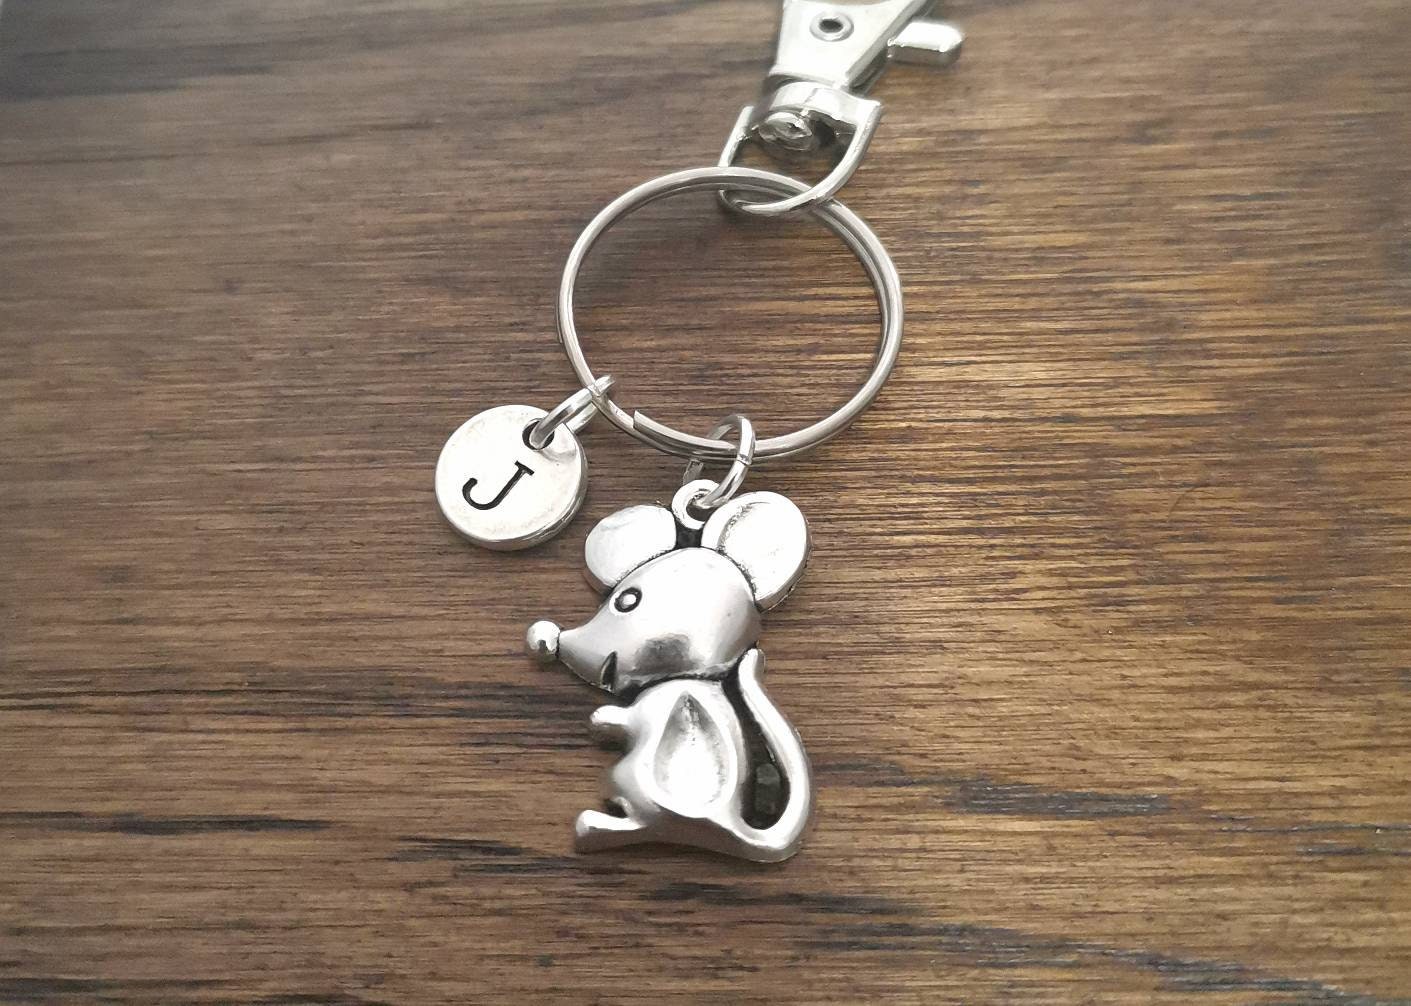 Mouse Keychain, Mouse Key ring, Mouse  gift, Rat Gift, Rat Keyring, Animal Gift, Mouse Keyring, Mouse Jewelry, Mouse Charm, Mice, Initial